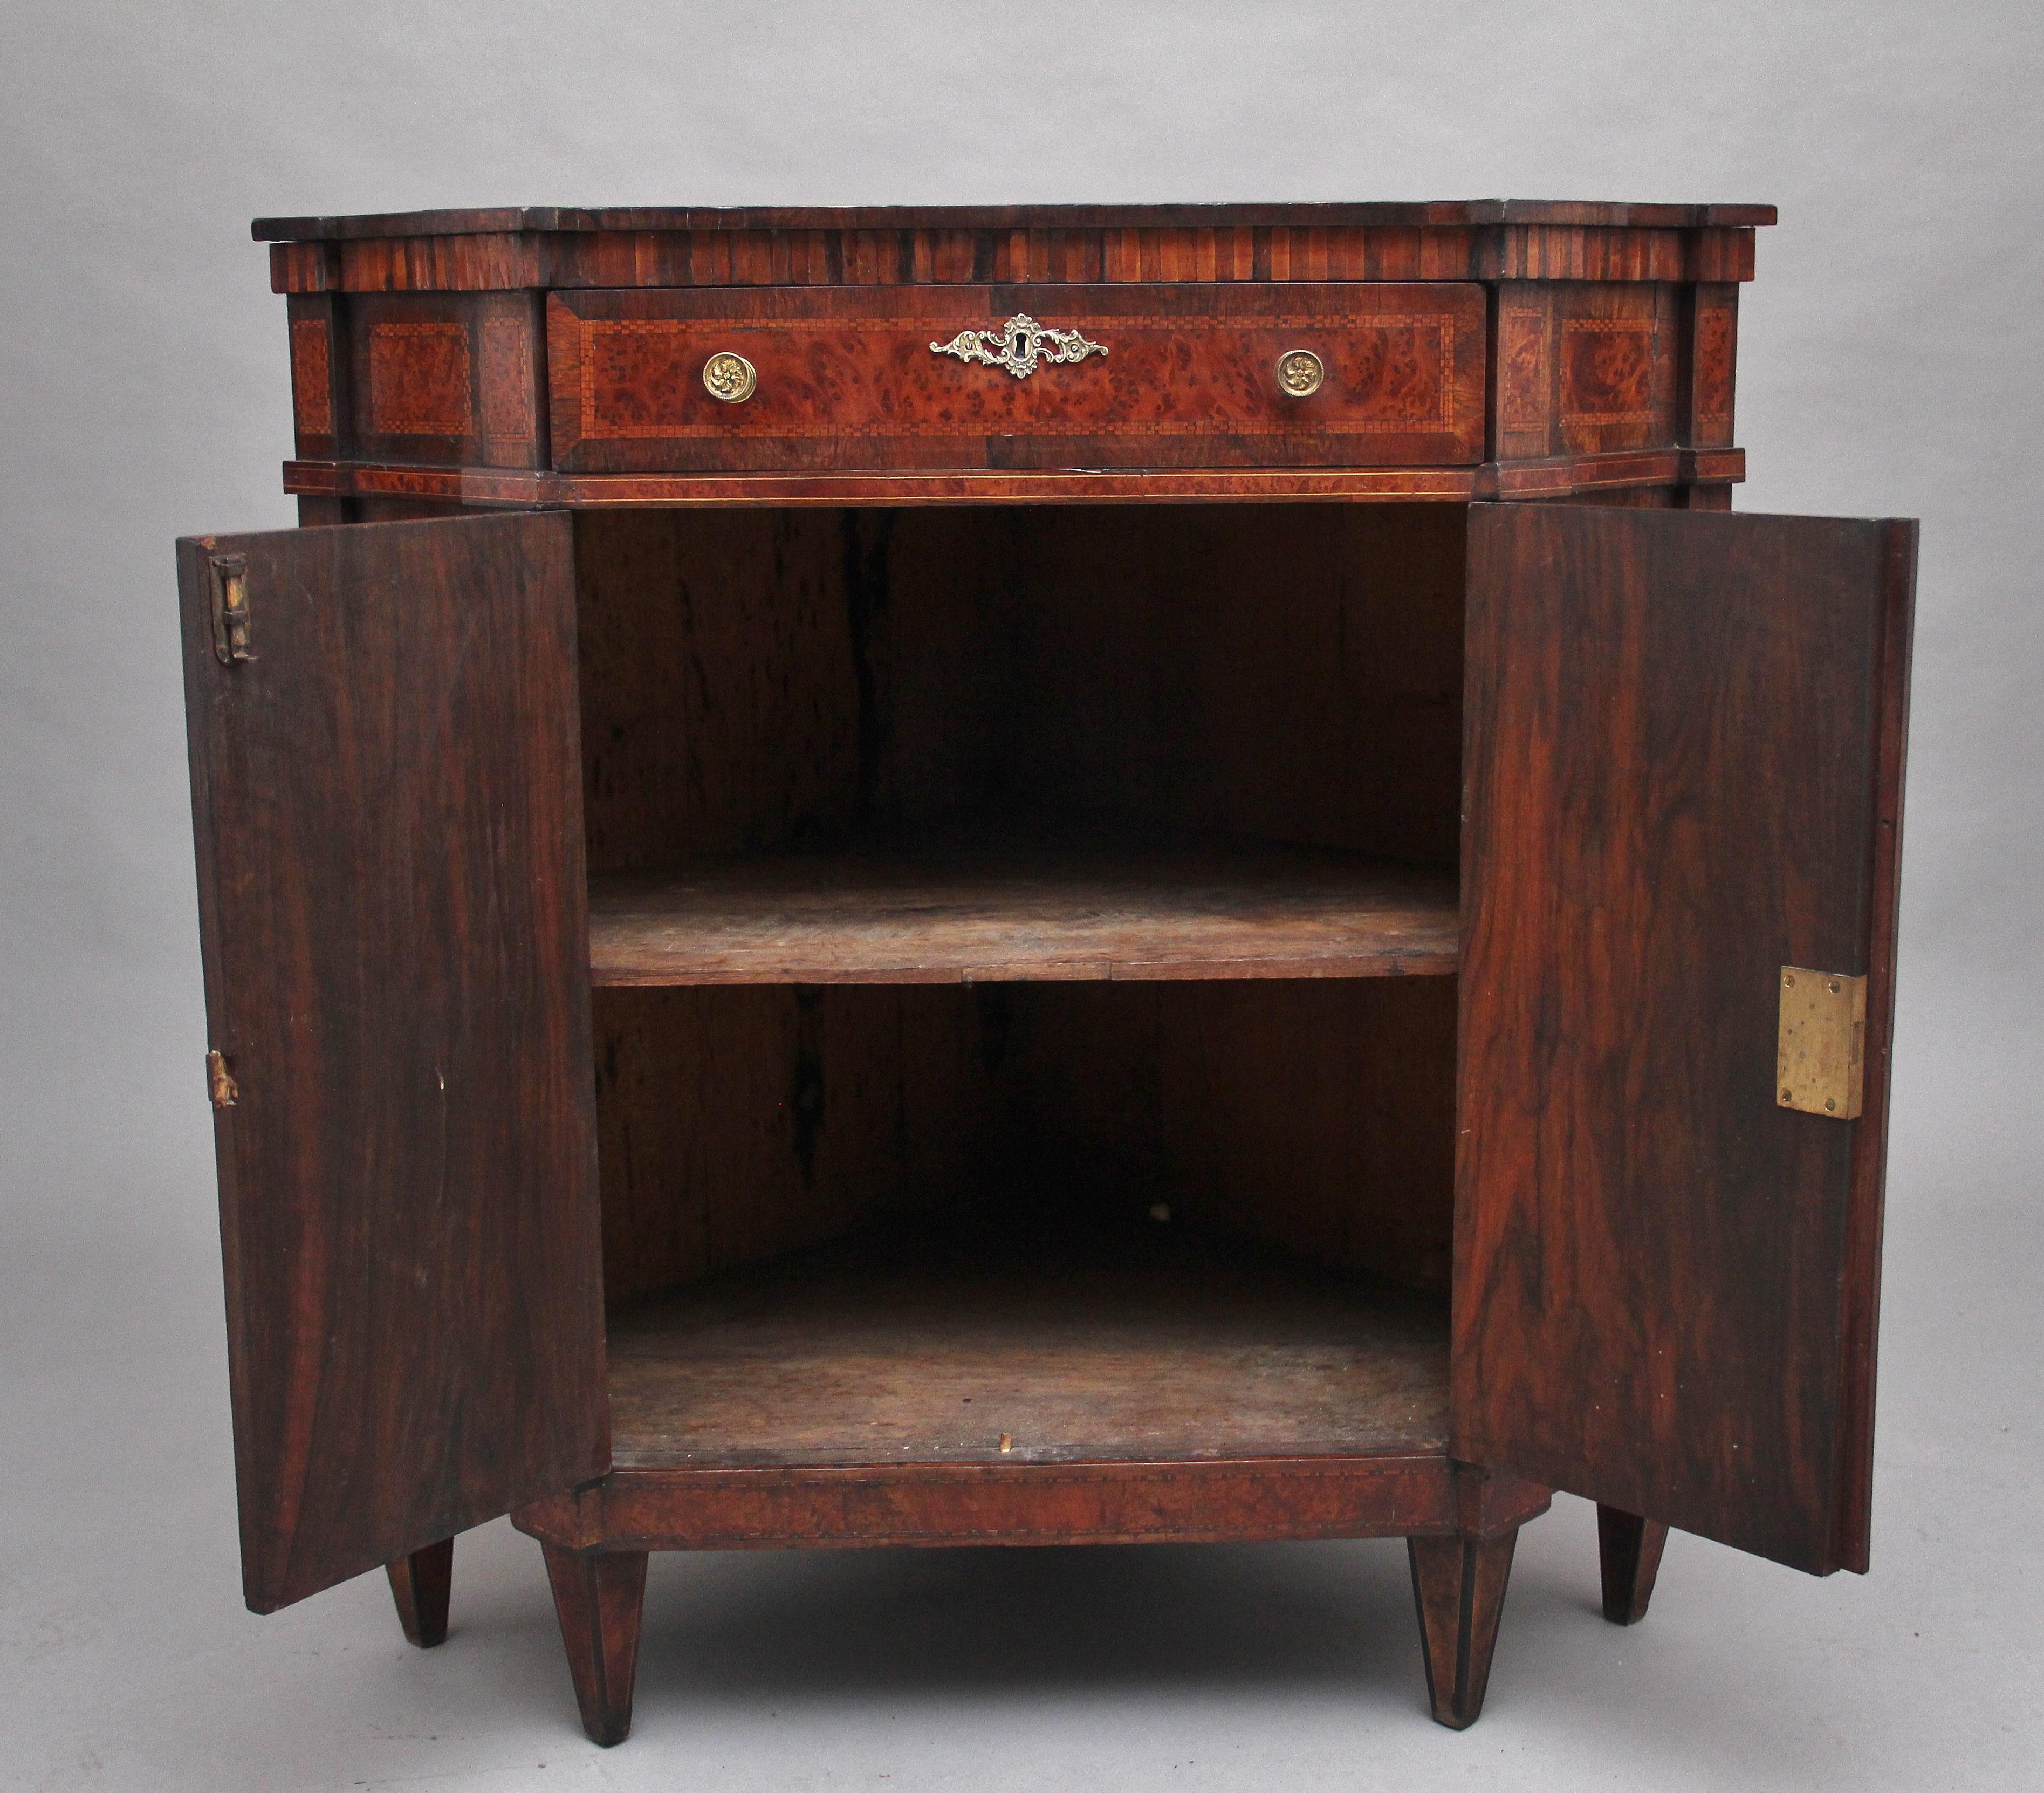 A highly decorative 19th century burr yew wood and inlaid corner cabinet by “Druce & Co” of London, the shaped top crossbanded and having decorative boxwood and chequered inlay with an oval shell inlay at the centre, having an oak lined frieze